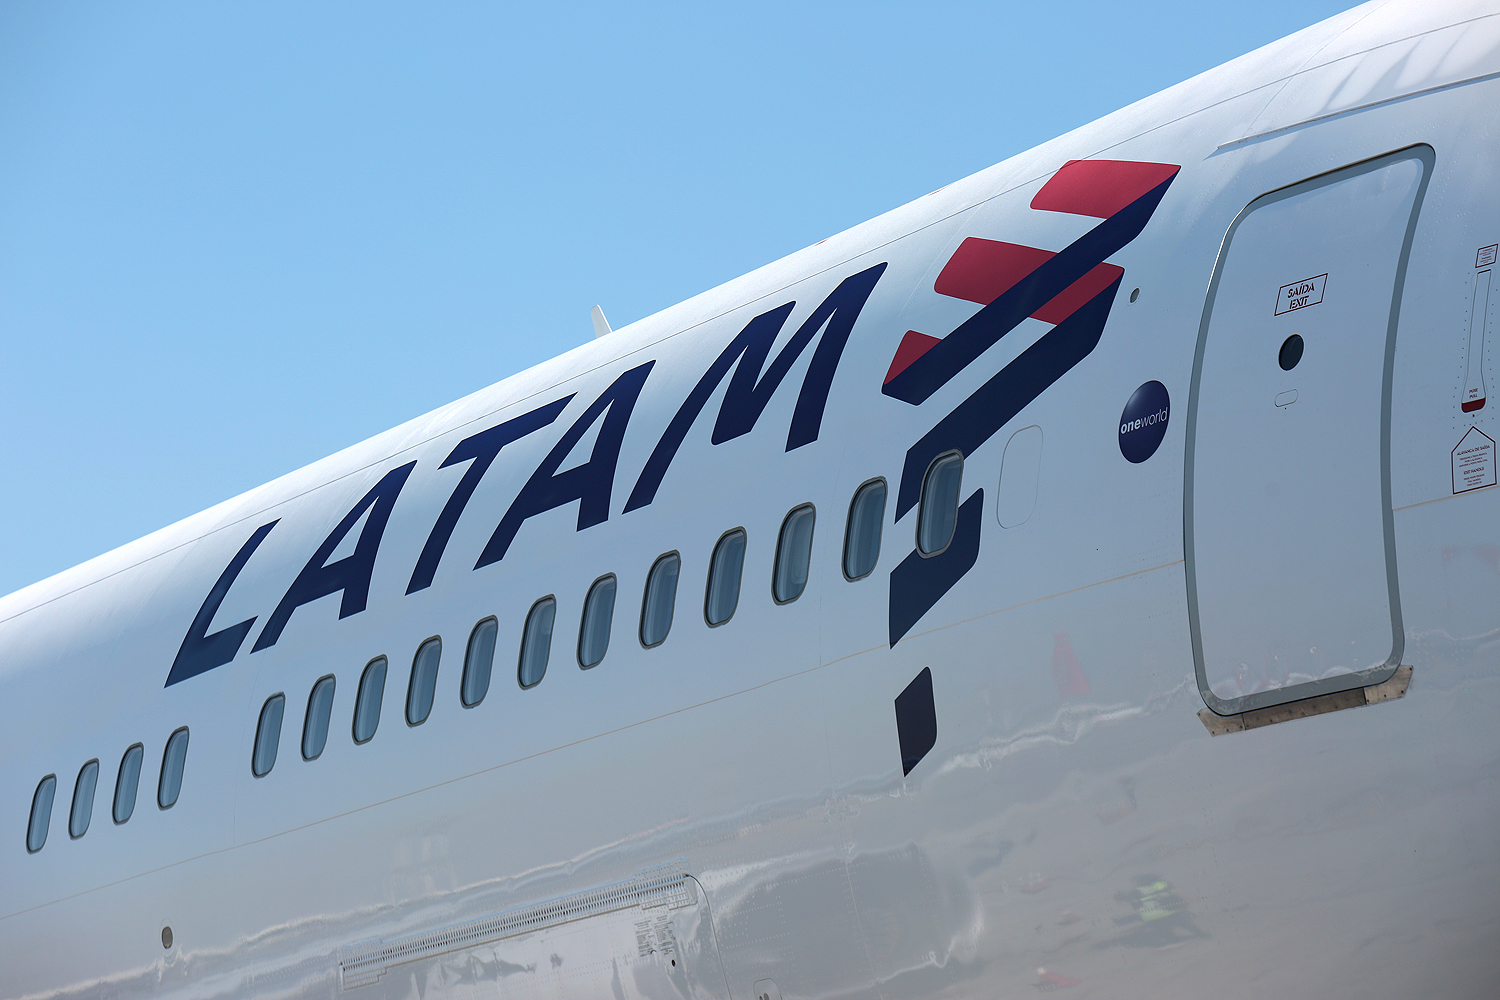 LATAM has debts of almost US$18 billion (R$95.76 billion) and was impacted by the interruption and drop in demand for flights with the Covid-19 pandemic.